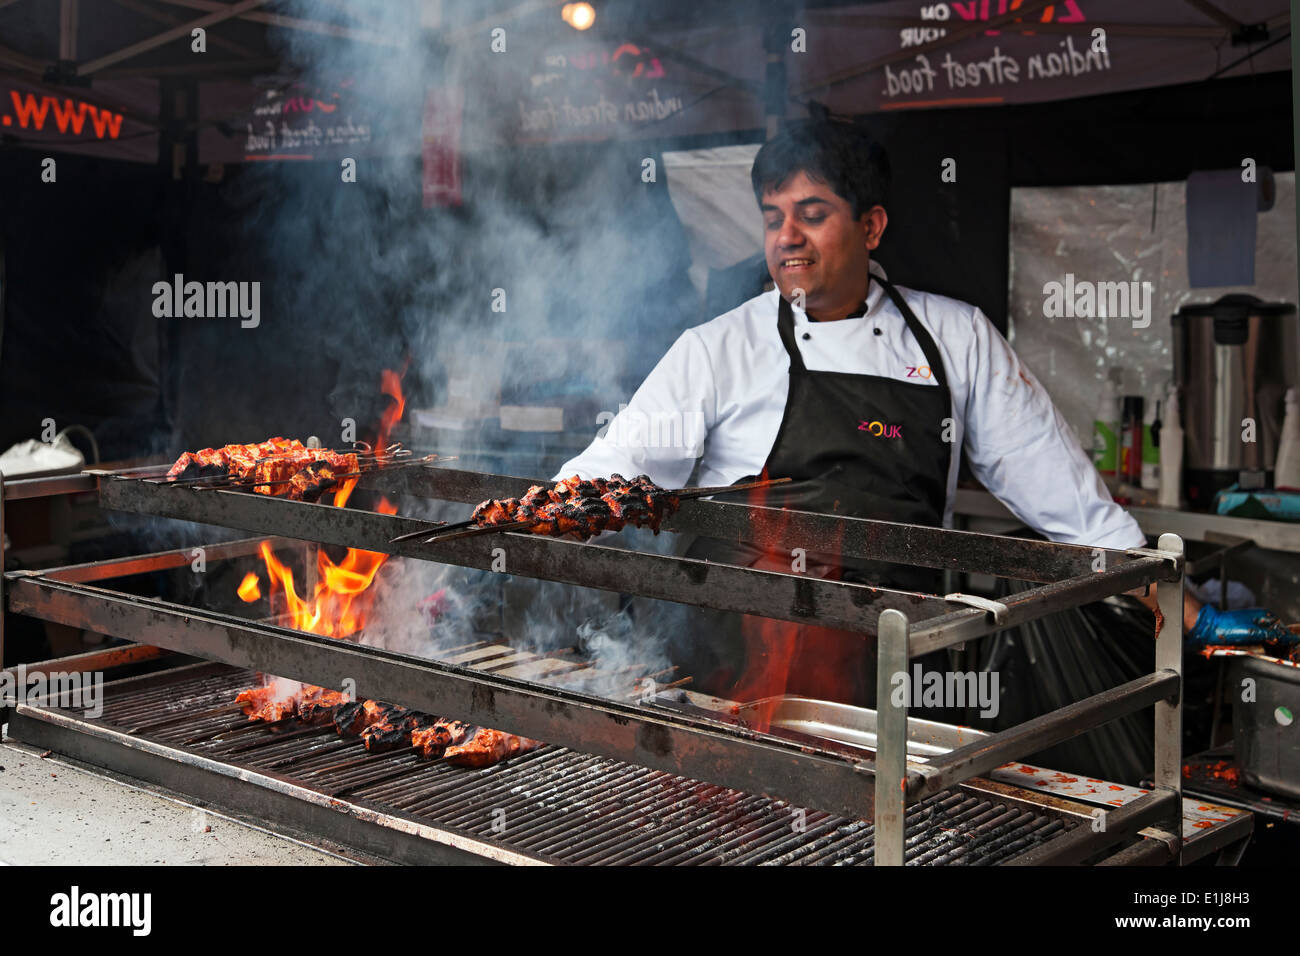 Man chef cooking meat on a grill flames Indian street food stand stall York North Yorkshire England UK United Kingdom GB Great Britain Stock Photo